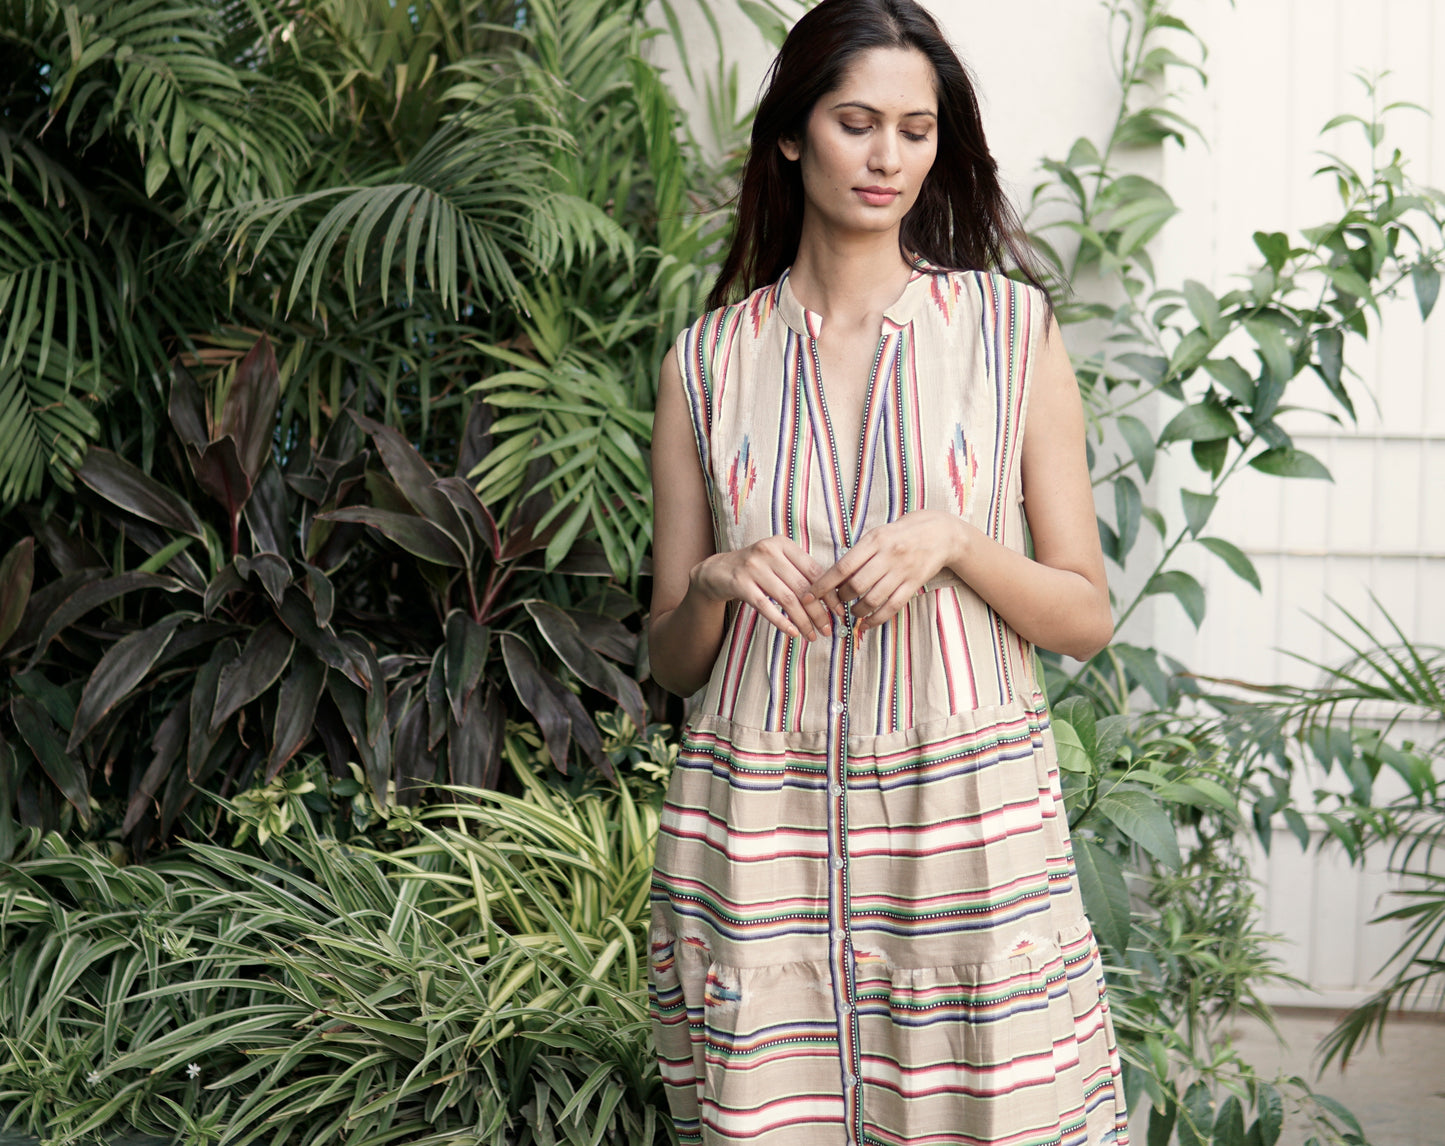 This is the most wonderful, completely hand made, summer maxi dress. The handloom cotton is so rich and completely authentic. The beige, white, green and pink Navaho style handwoven pattern is complemented by the great tiered shape.